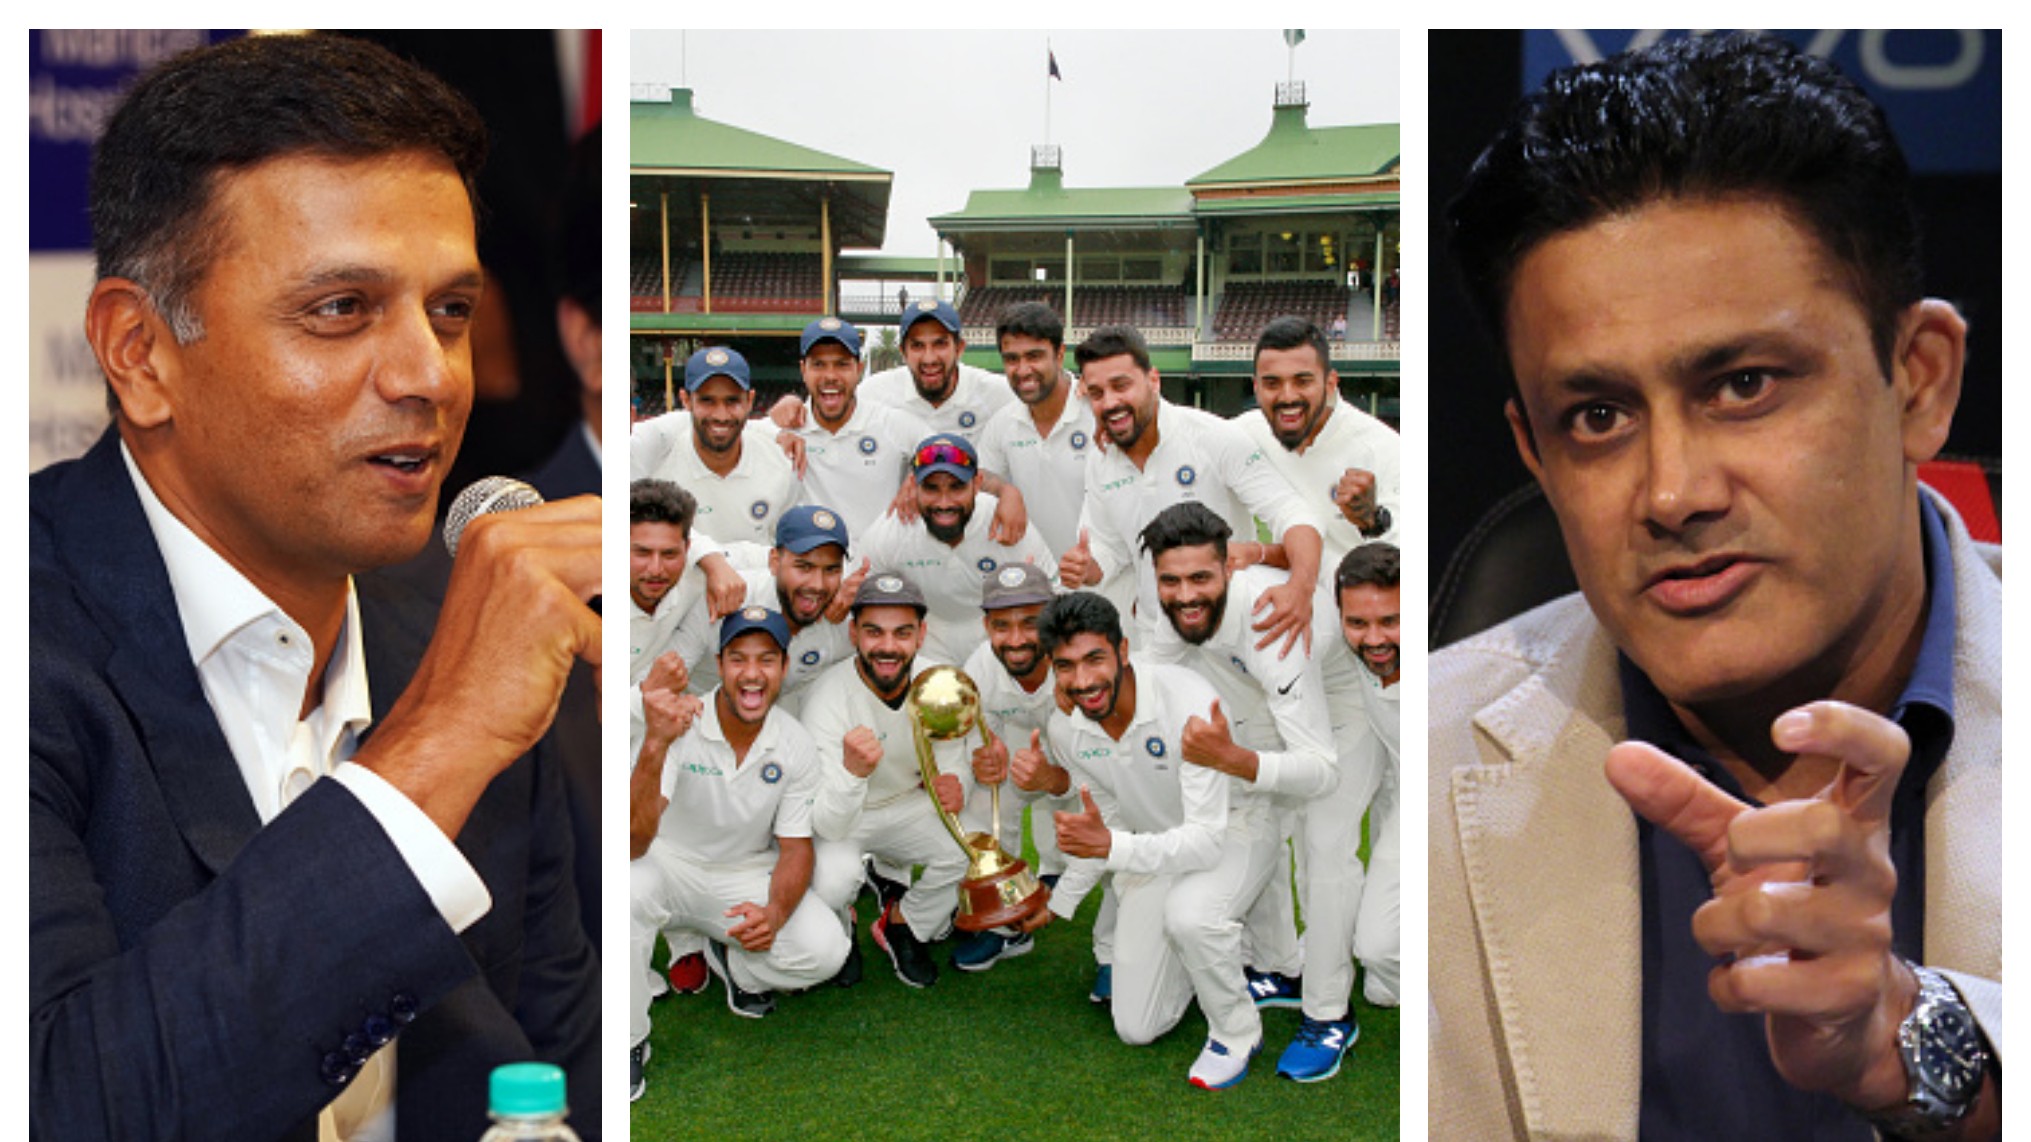 AUS v IND 2020-21: Former captains Dravid, Kumble plot how India can win the Test series in Australia